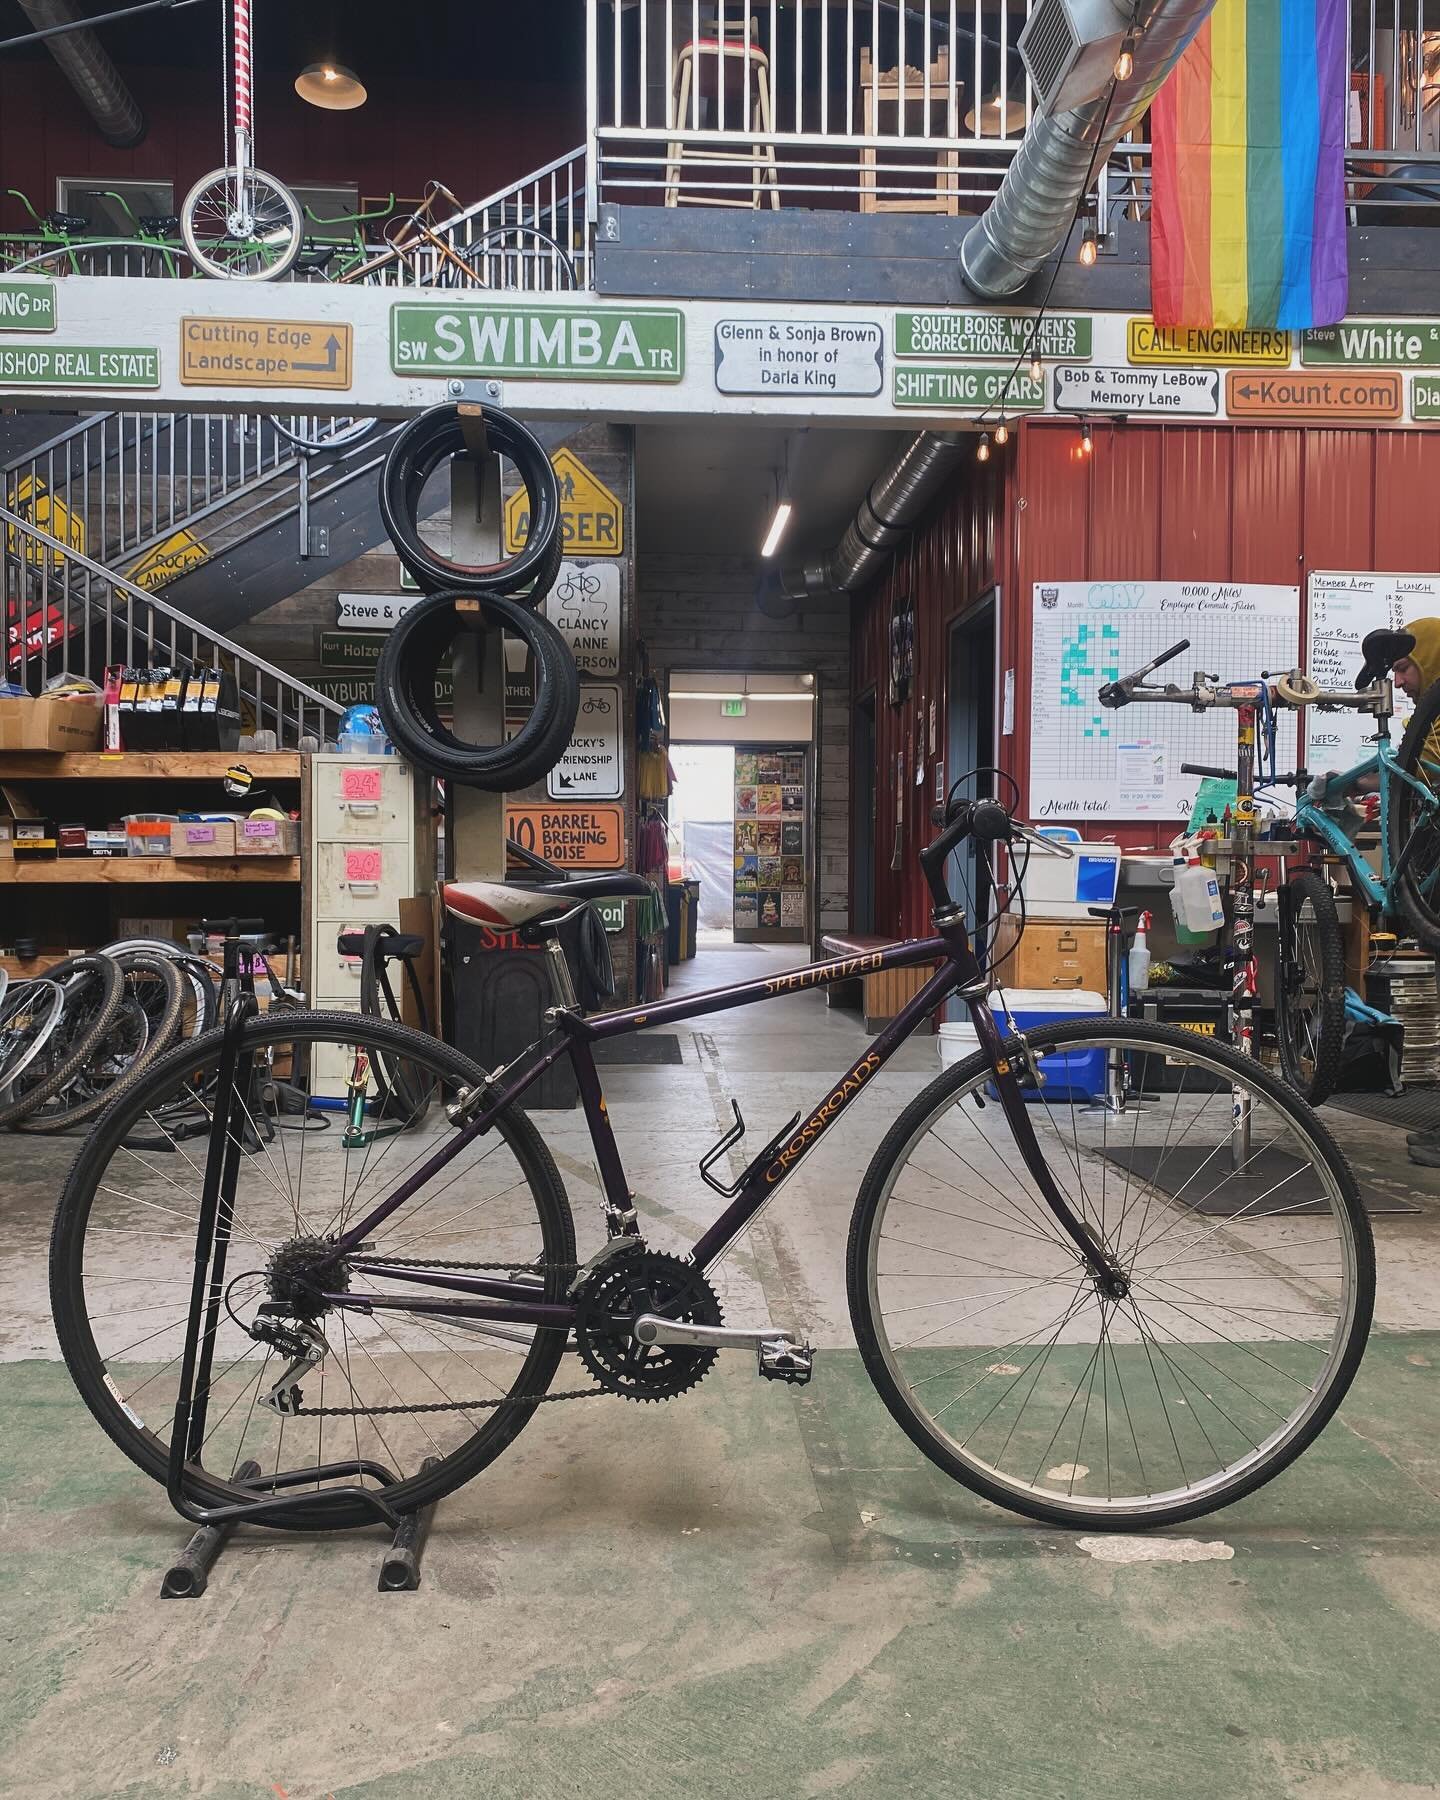 Yoooo! New batch of refurbished bikes. Make a TRIP down to the store and accidentally buy one of these! (Get it? See our newest reel, and share it too!)

For Bike of the Week, we have this awesome Specialized Crossroads, priced at $300. It is a 43 cm